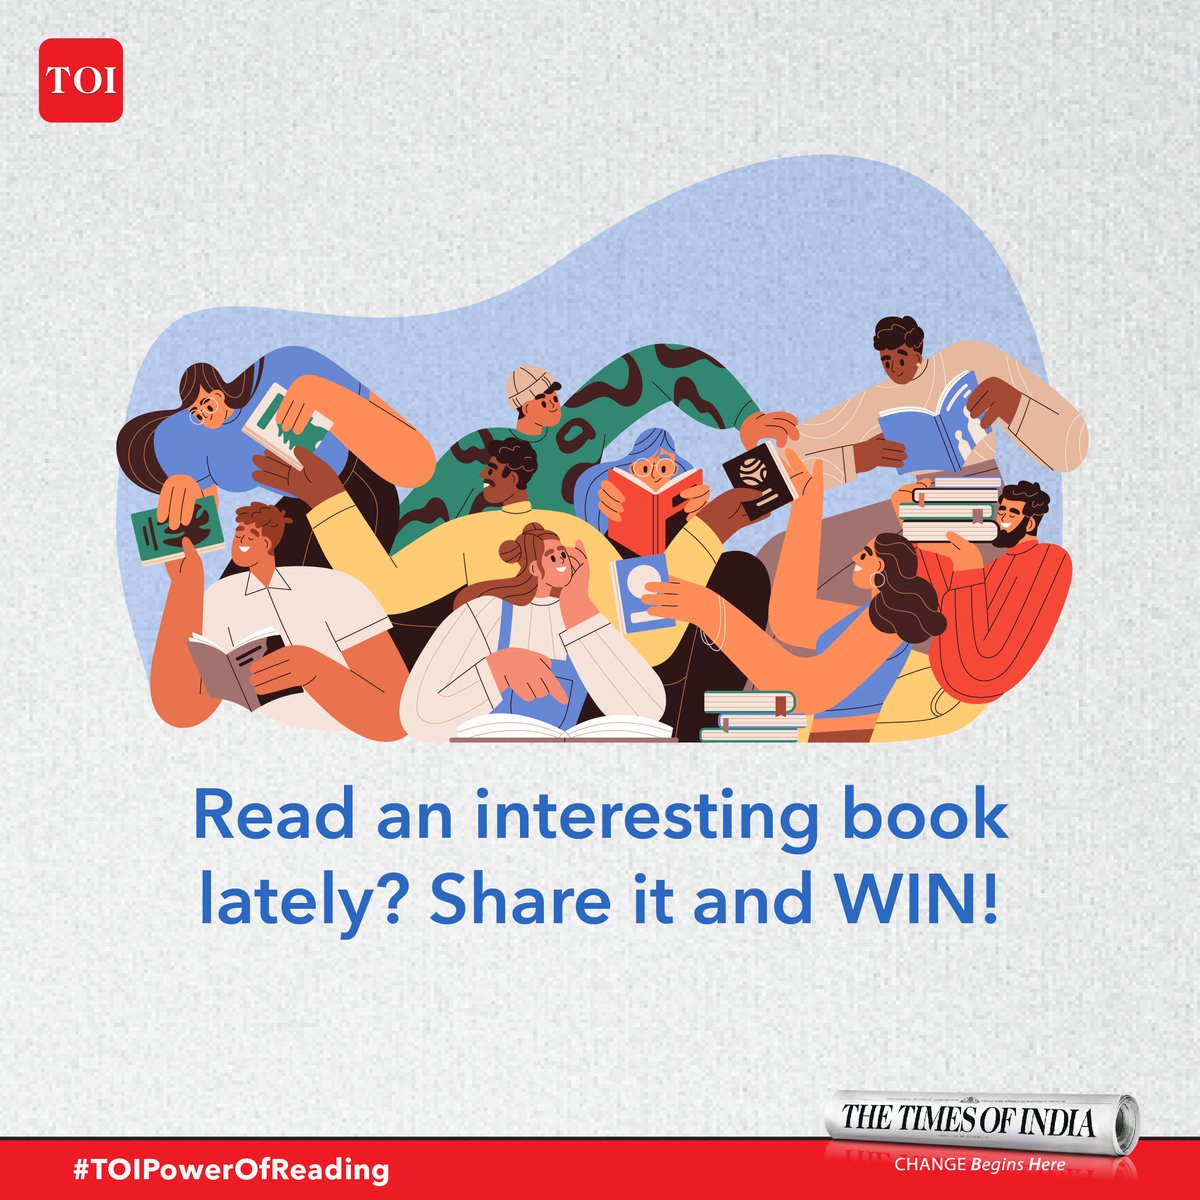 Experienced the magic of reading an interesting book recently? Then share it with fellow bibliophiles by commenting below the book’s name using #TOIPowerOfReading. Do tag your friends/family and ask them to share their favourites.

Comments with most engagements will win exciting